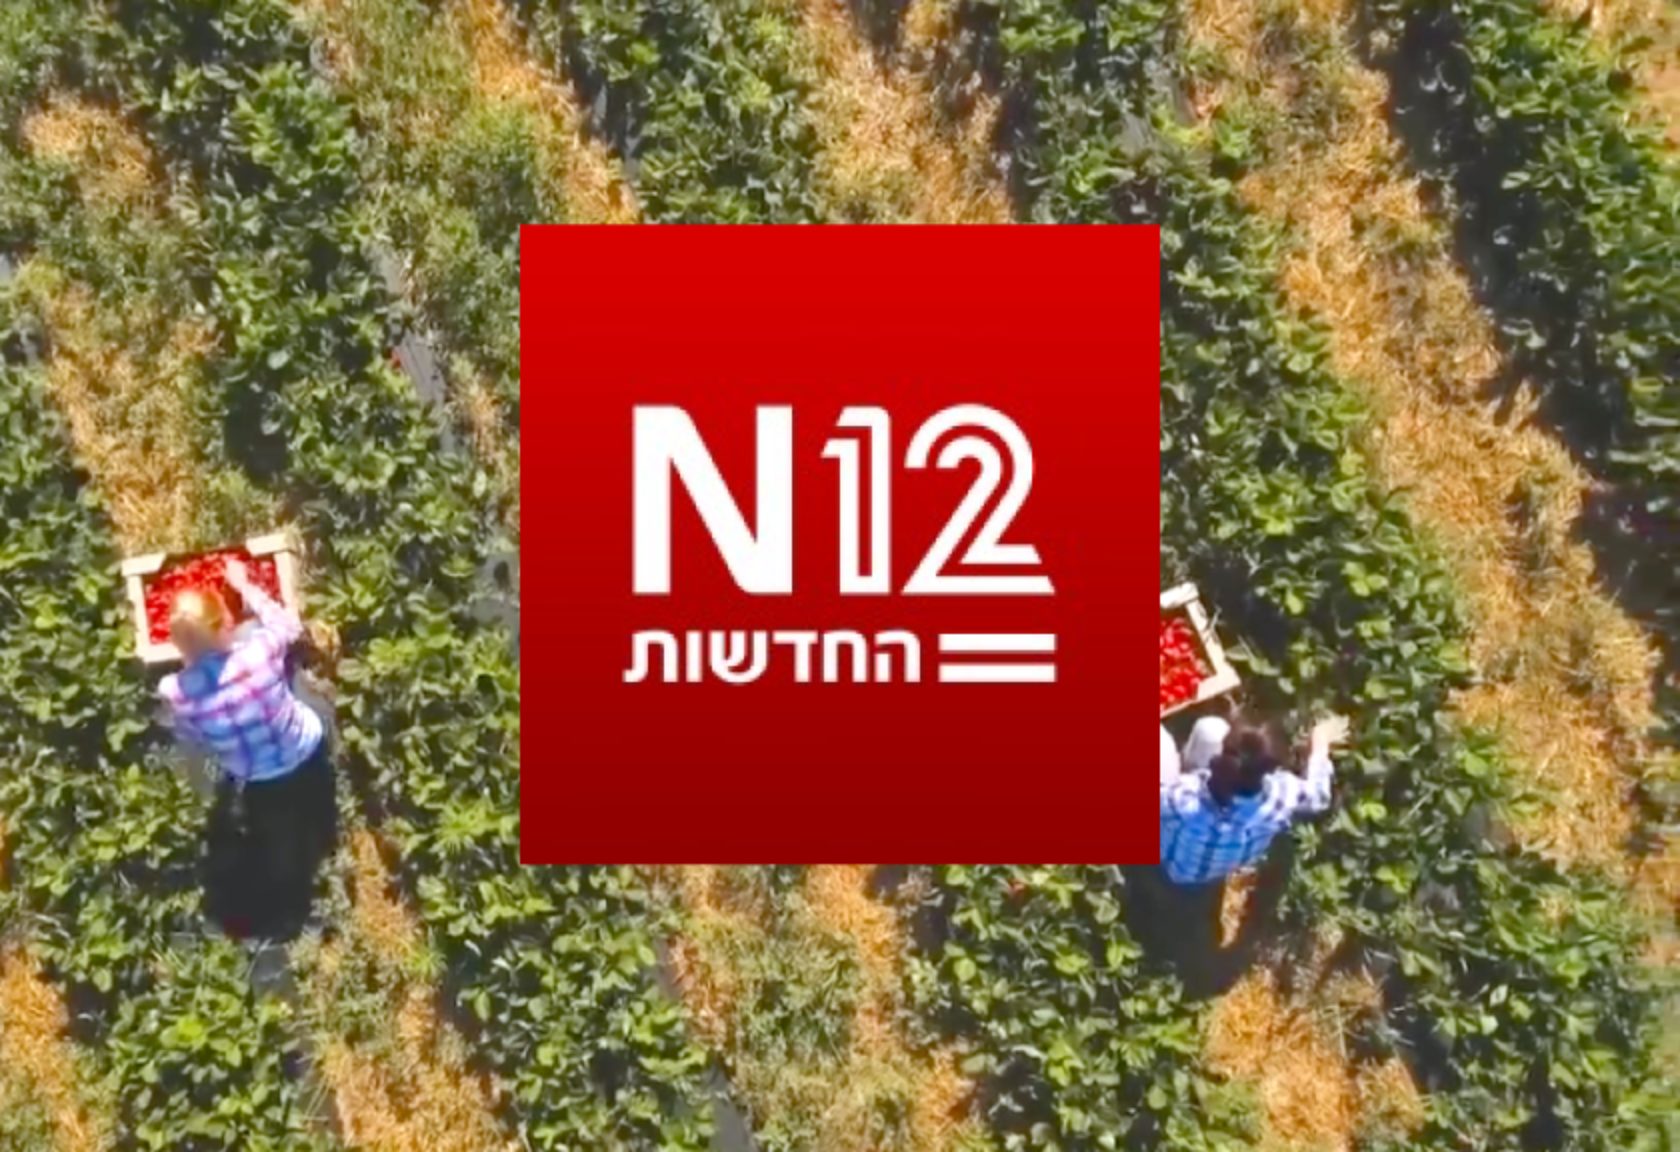 Wiliot Featured on Israel's Prime Time TV - Channel 12 News